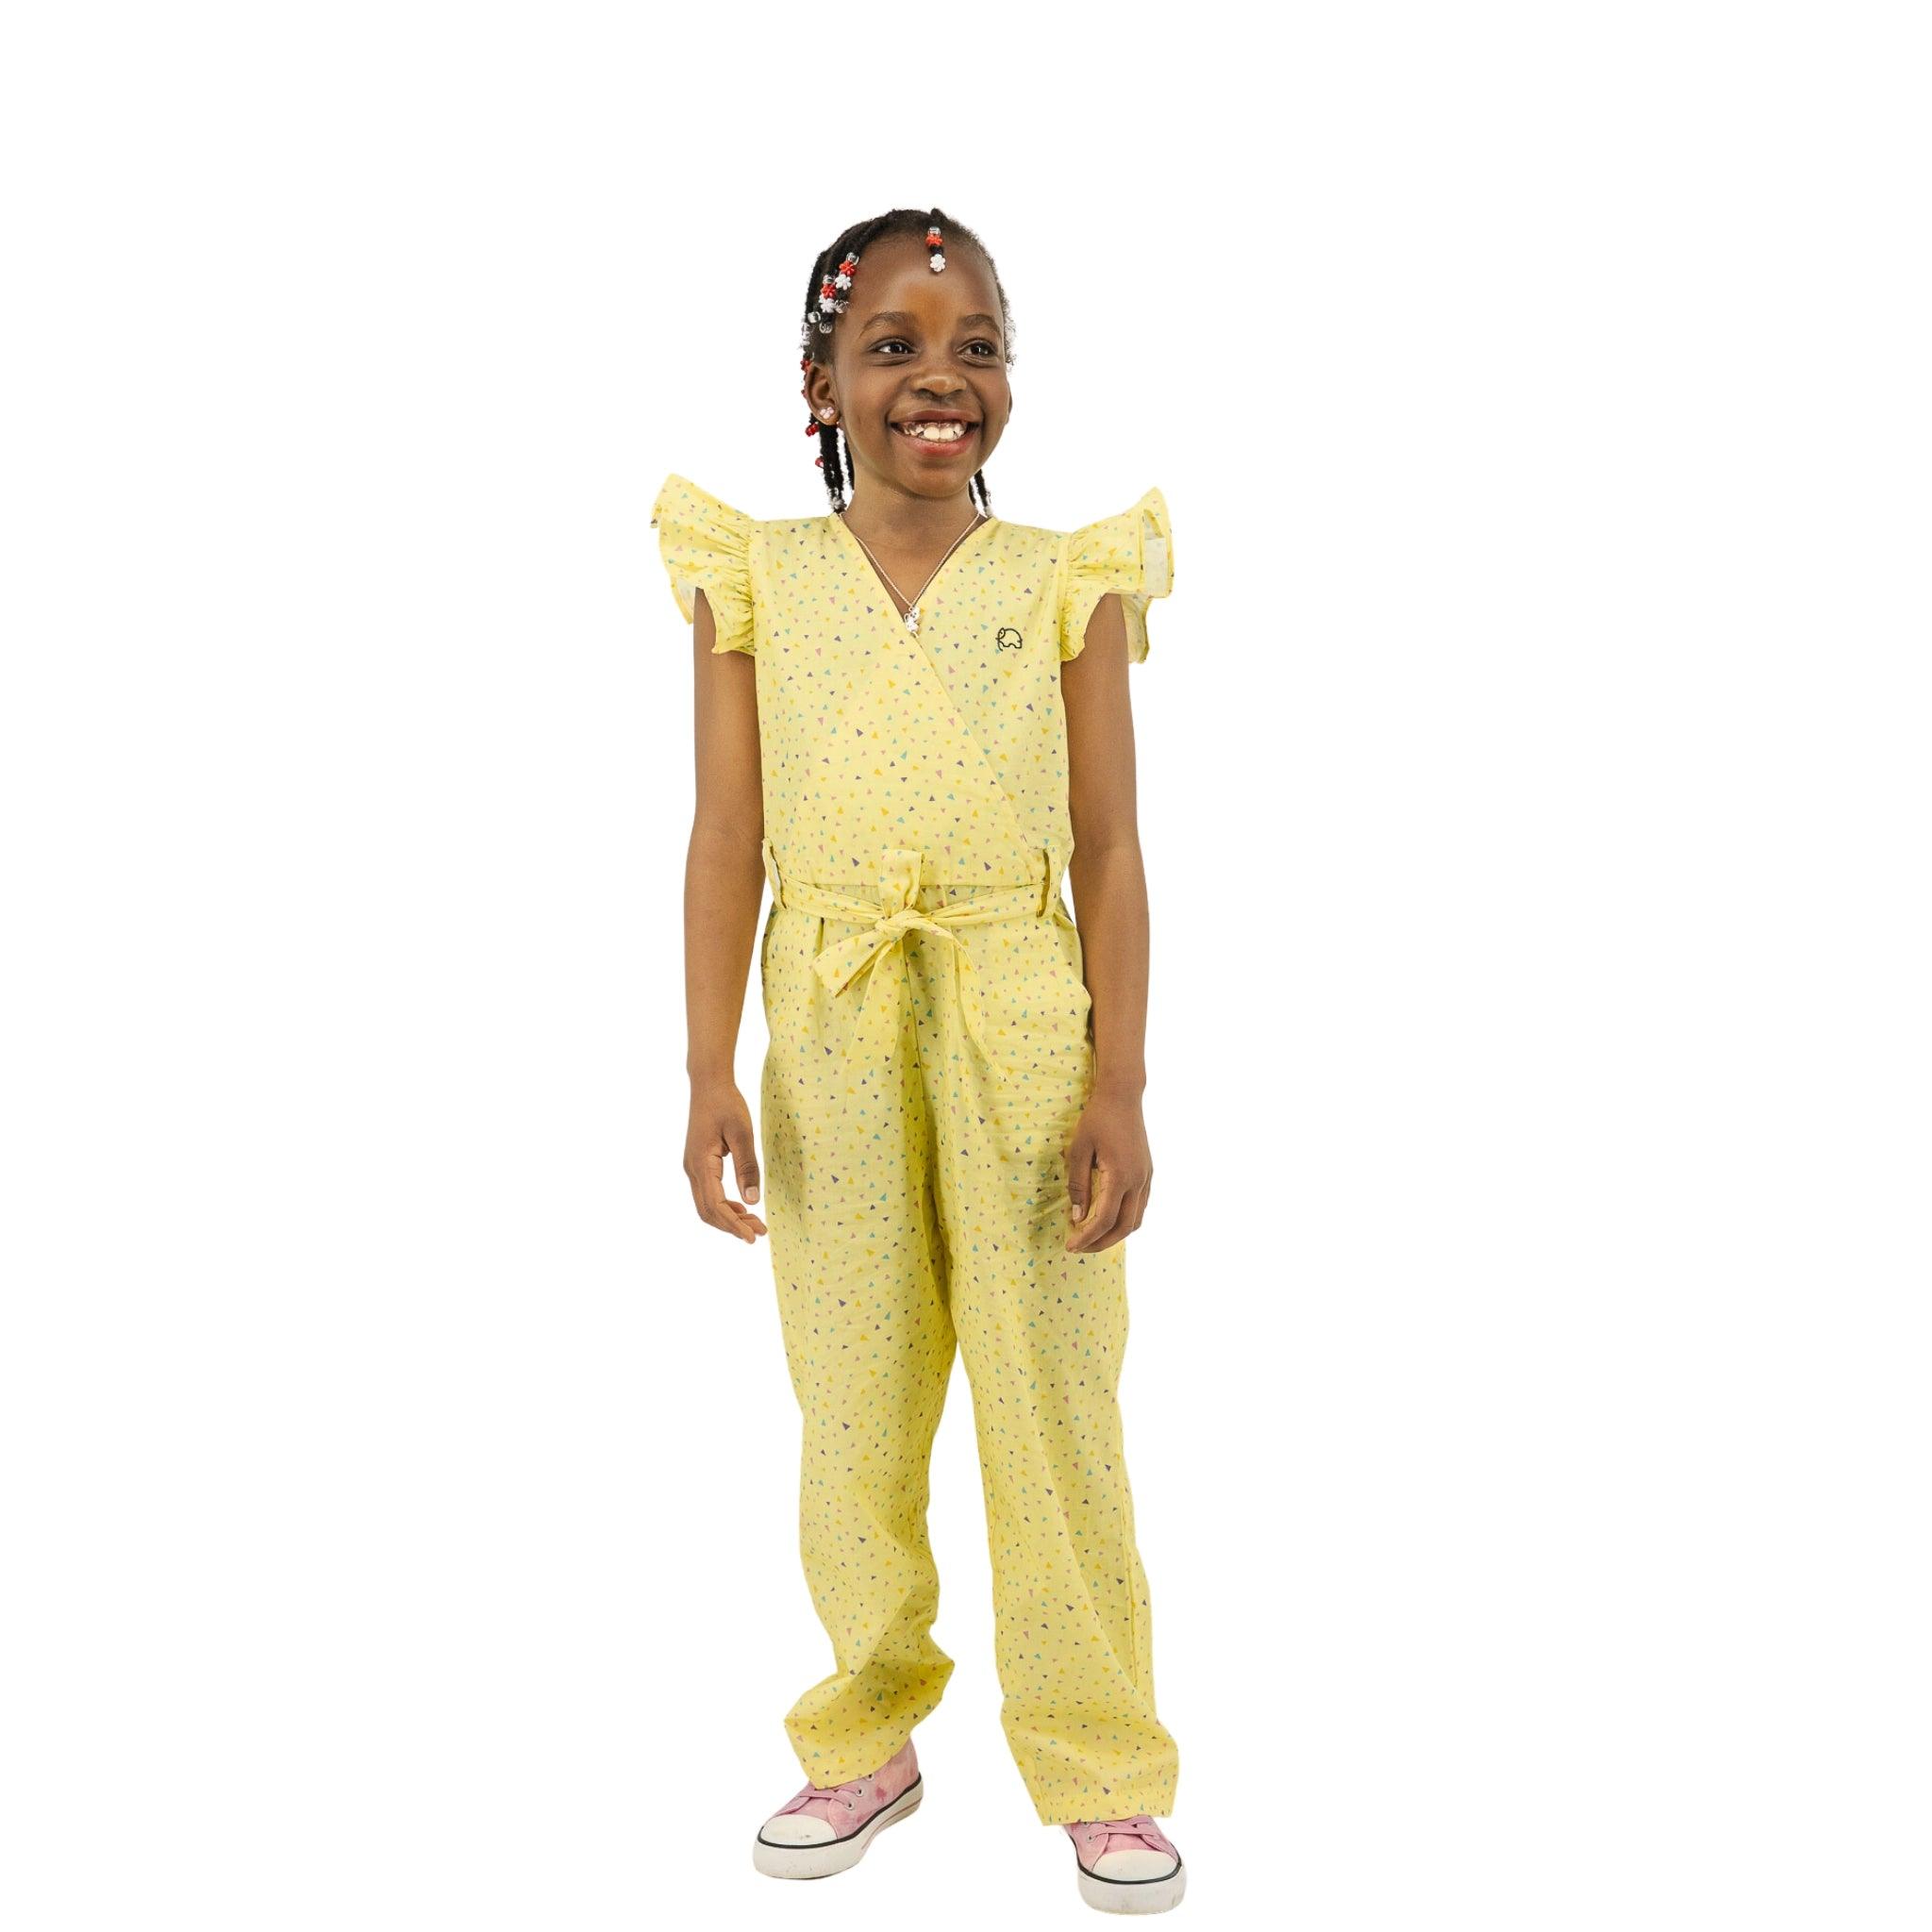 Young girl in a Karee Lemon Meringue Cotton V-Neck Jumpsuit and pink shoes with braided hair smiling against a white background.